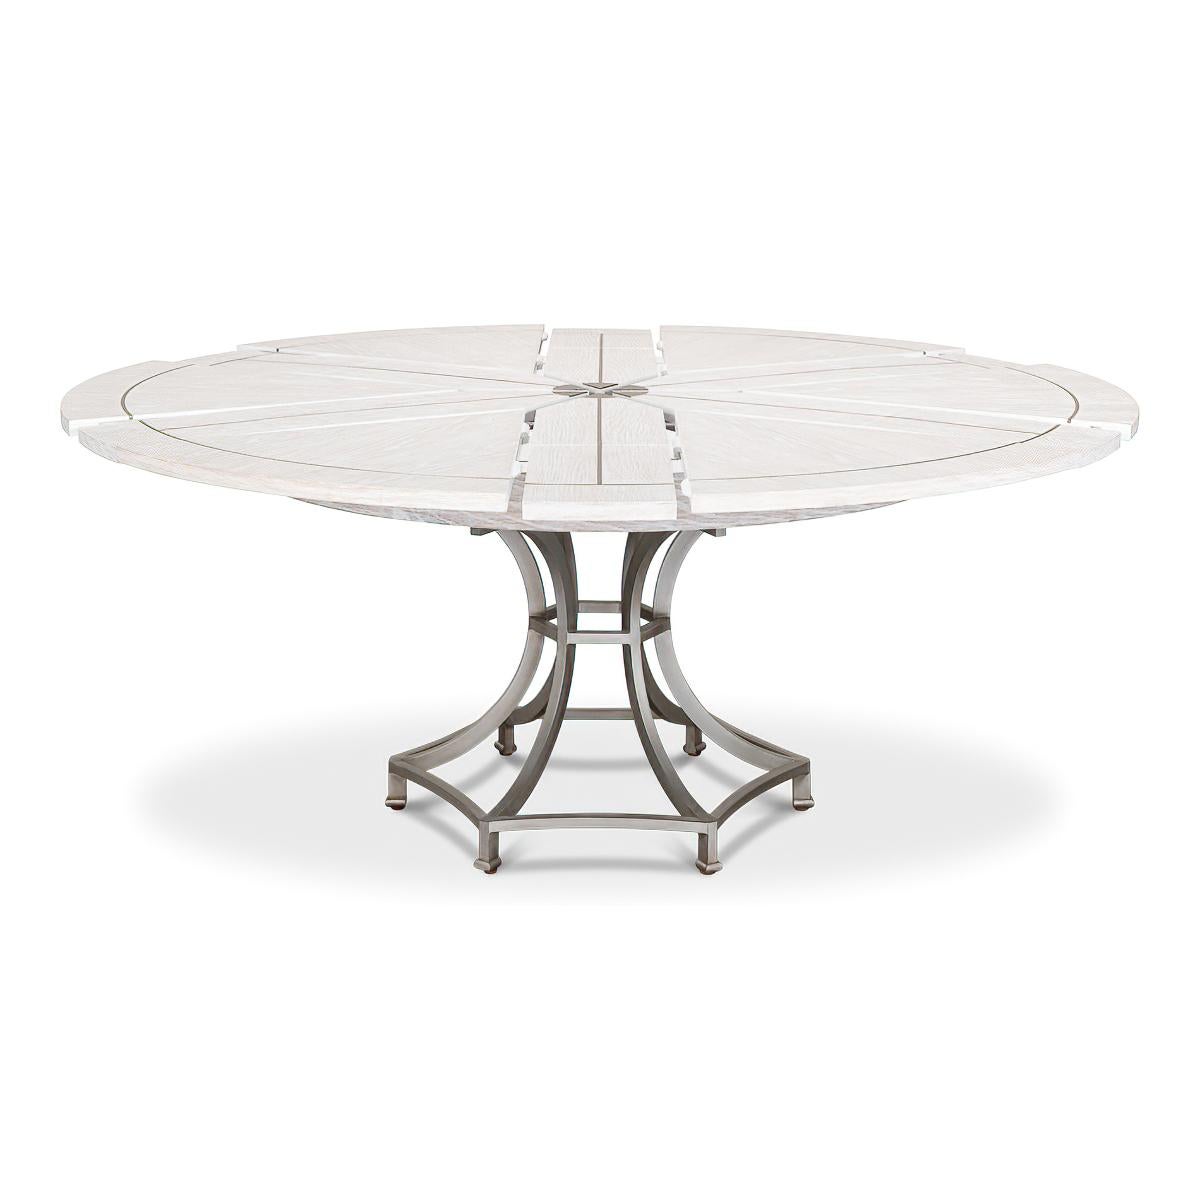 Modern Industrial Round Dining Table, White Wash In New Condition In Westwood, NJ